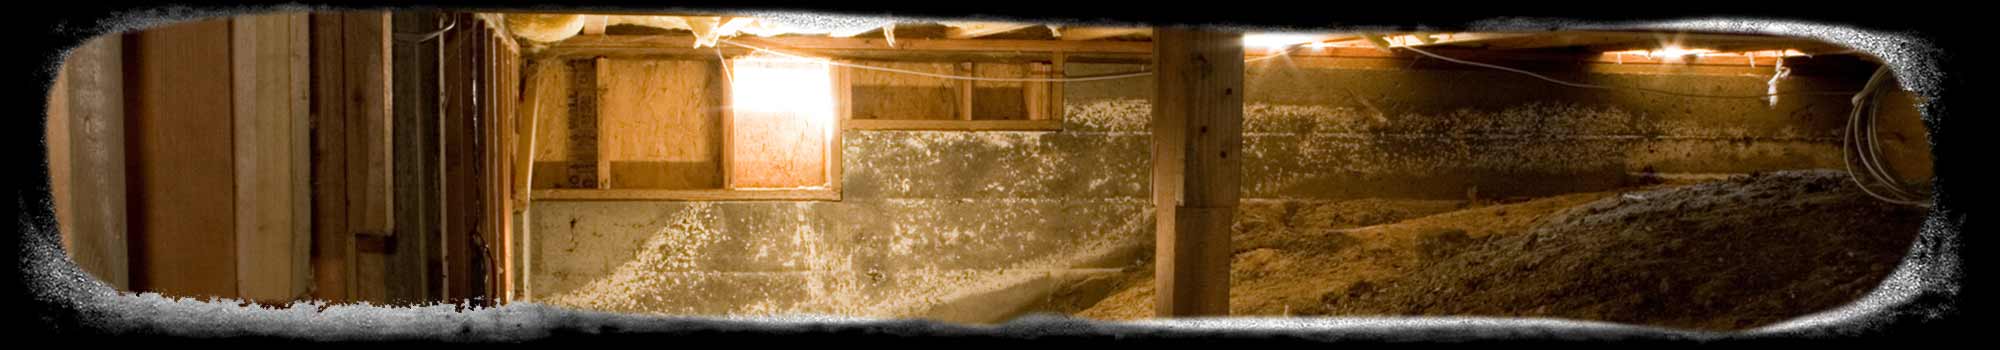 Bloom Crawl Space Services